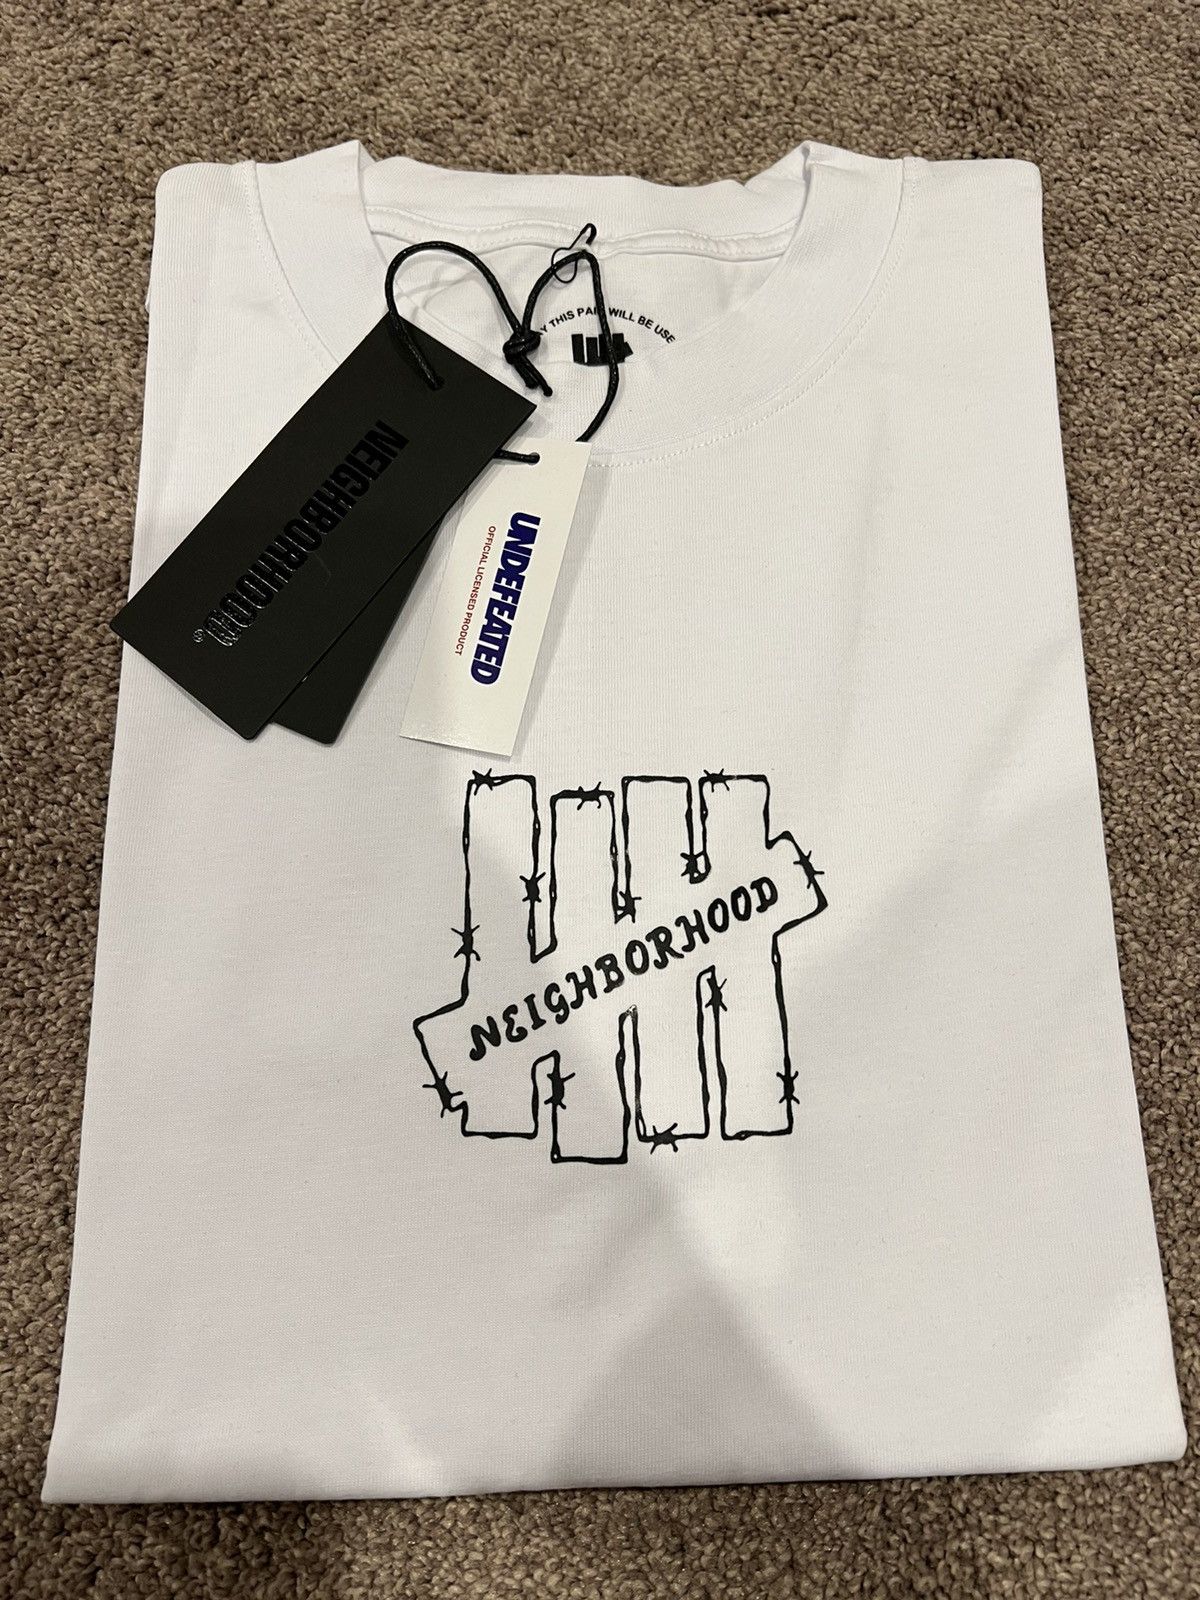 Undefeated Brand new Neighborhood X undefeated white t-shirt large | Grailed